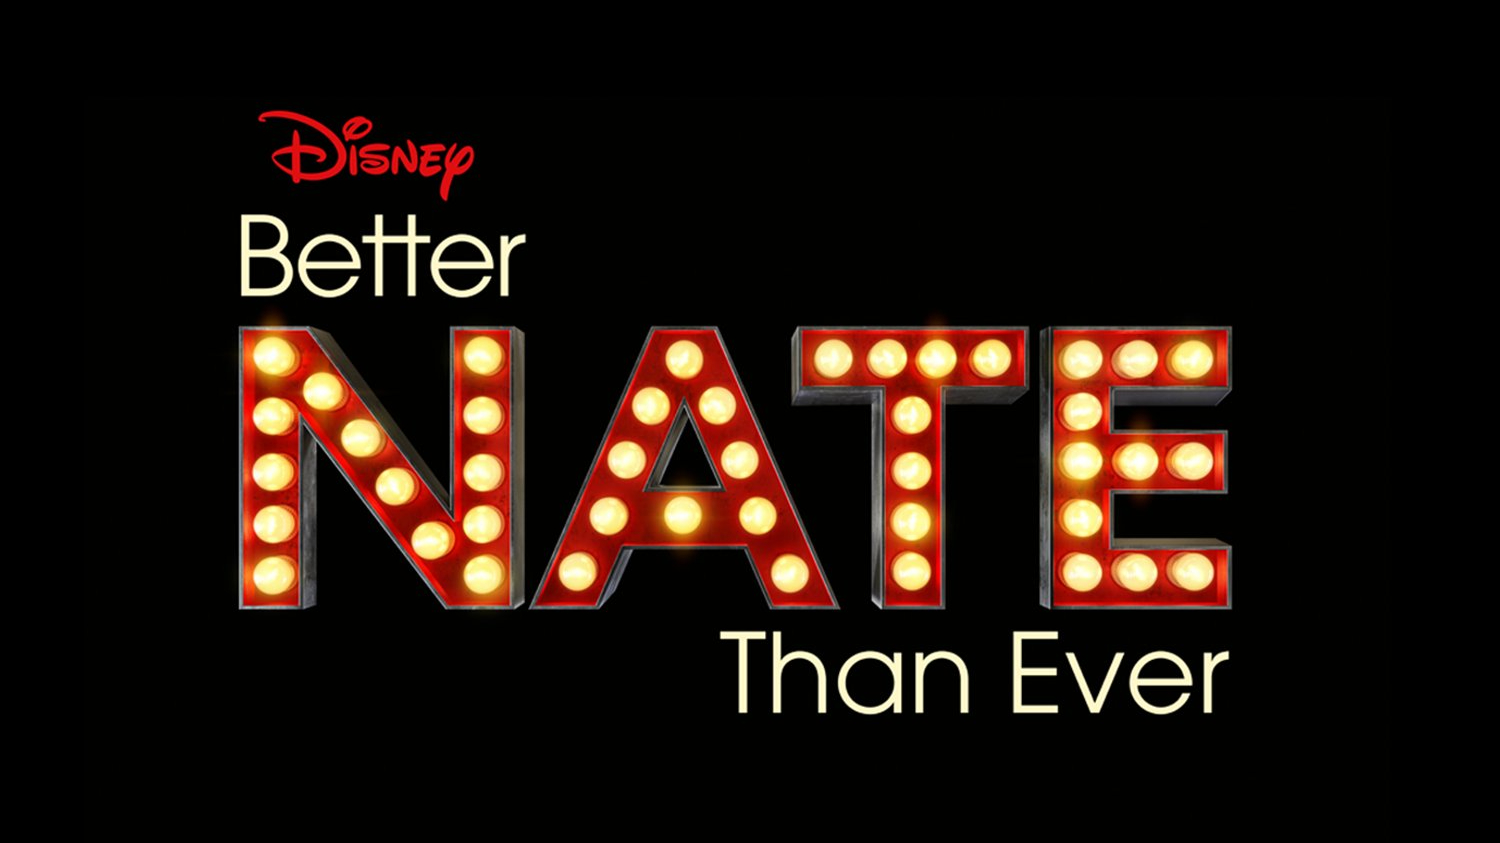 Get A First Look At The Upcoming Disney+ Musical ‘Better Nate Than Ever’